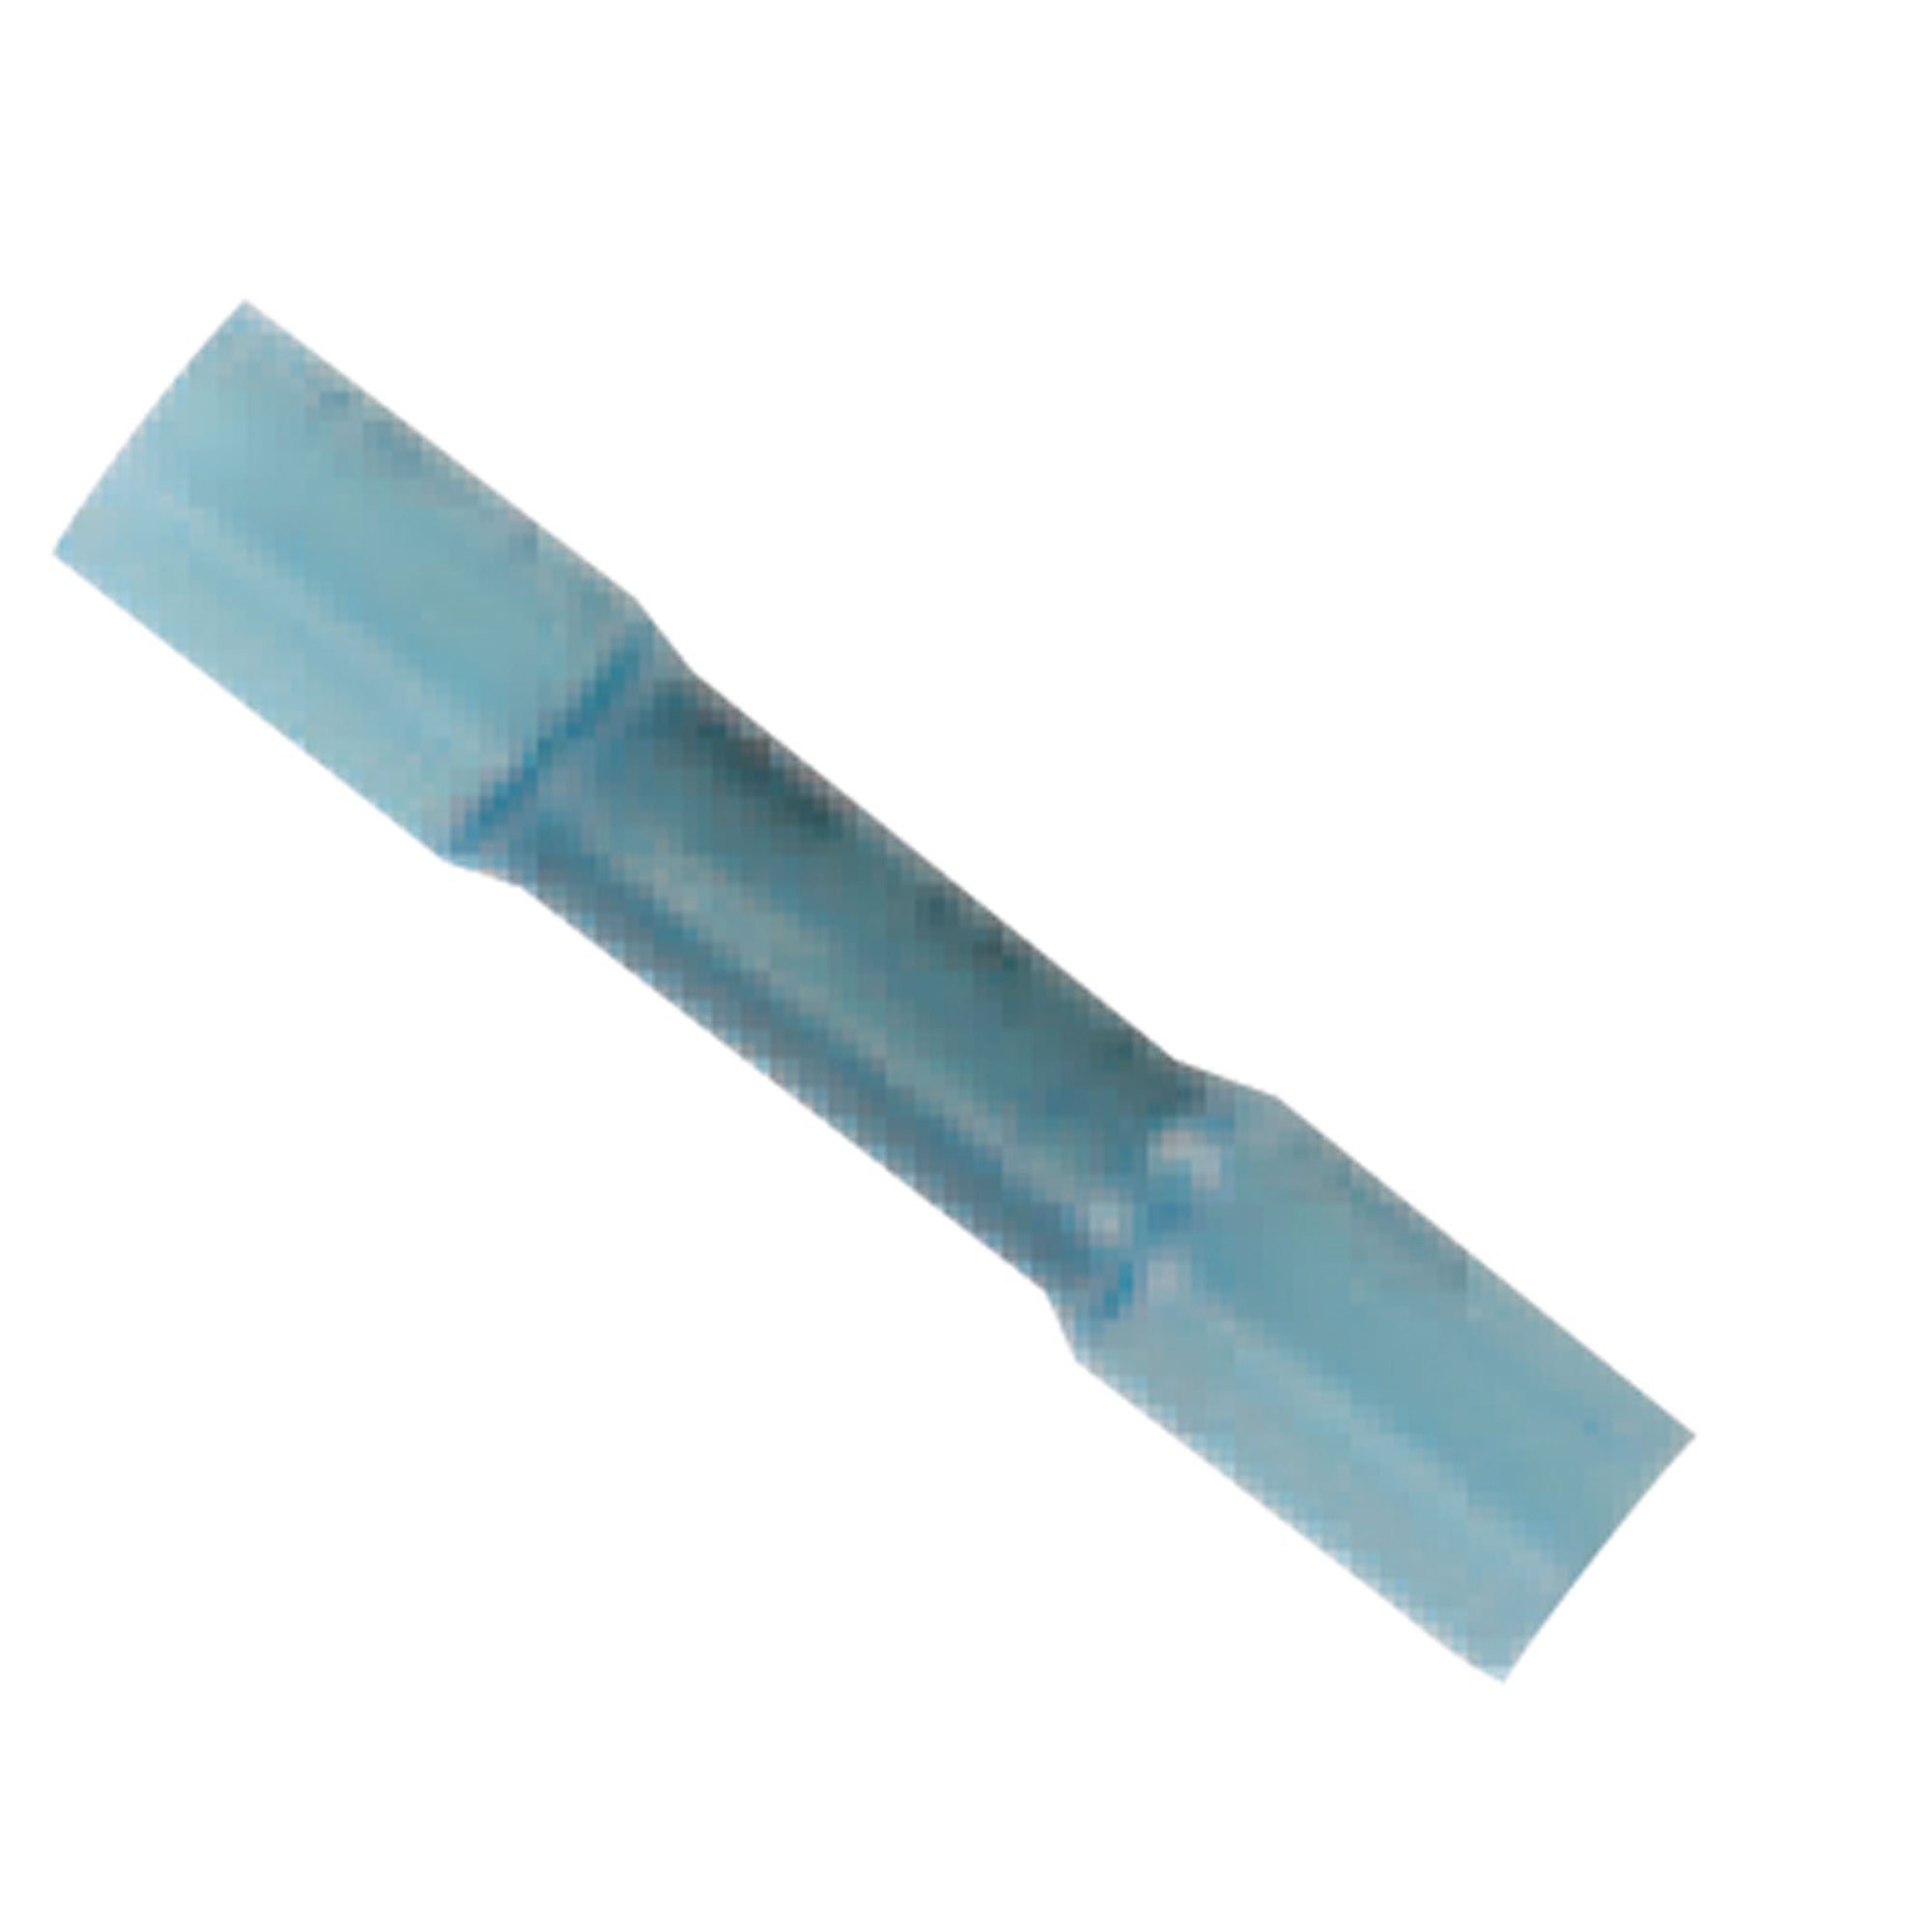 Ancor 309103 Heat Shrink Butt Connector - 16-14, Blue, Pack of 3